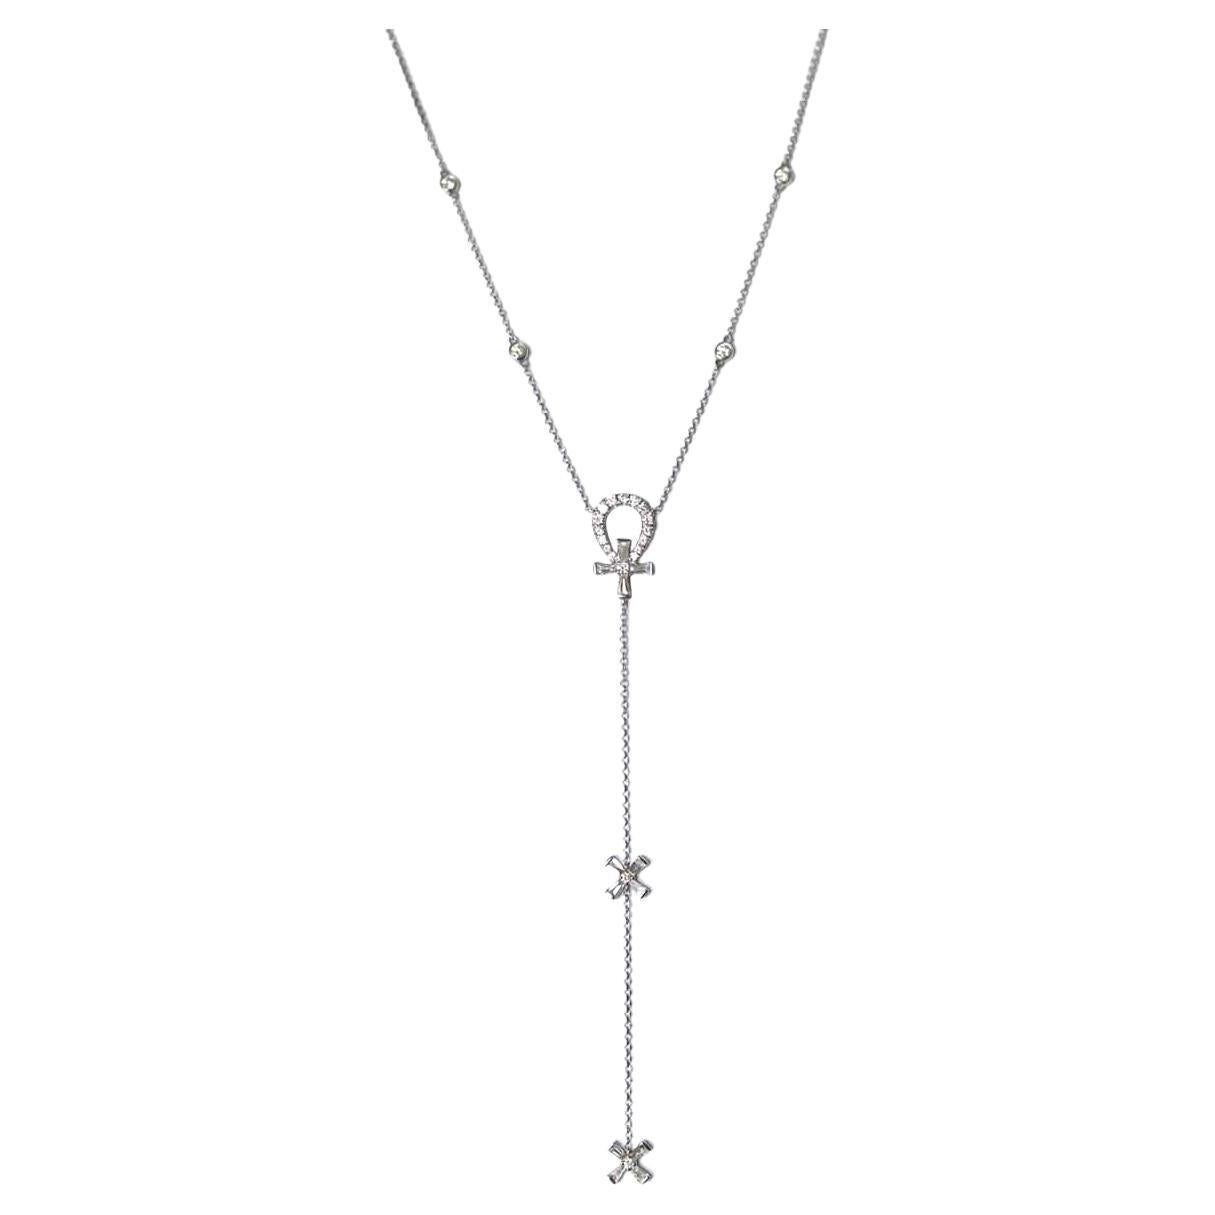 Tess Van Ghert Ankh 18K gold necklace with diamonds For Sale